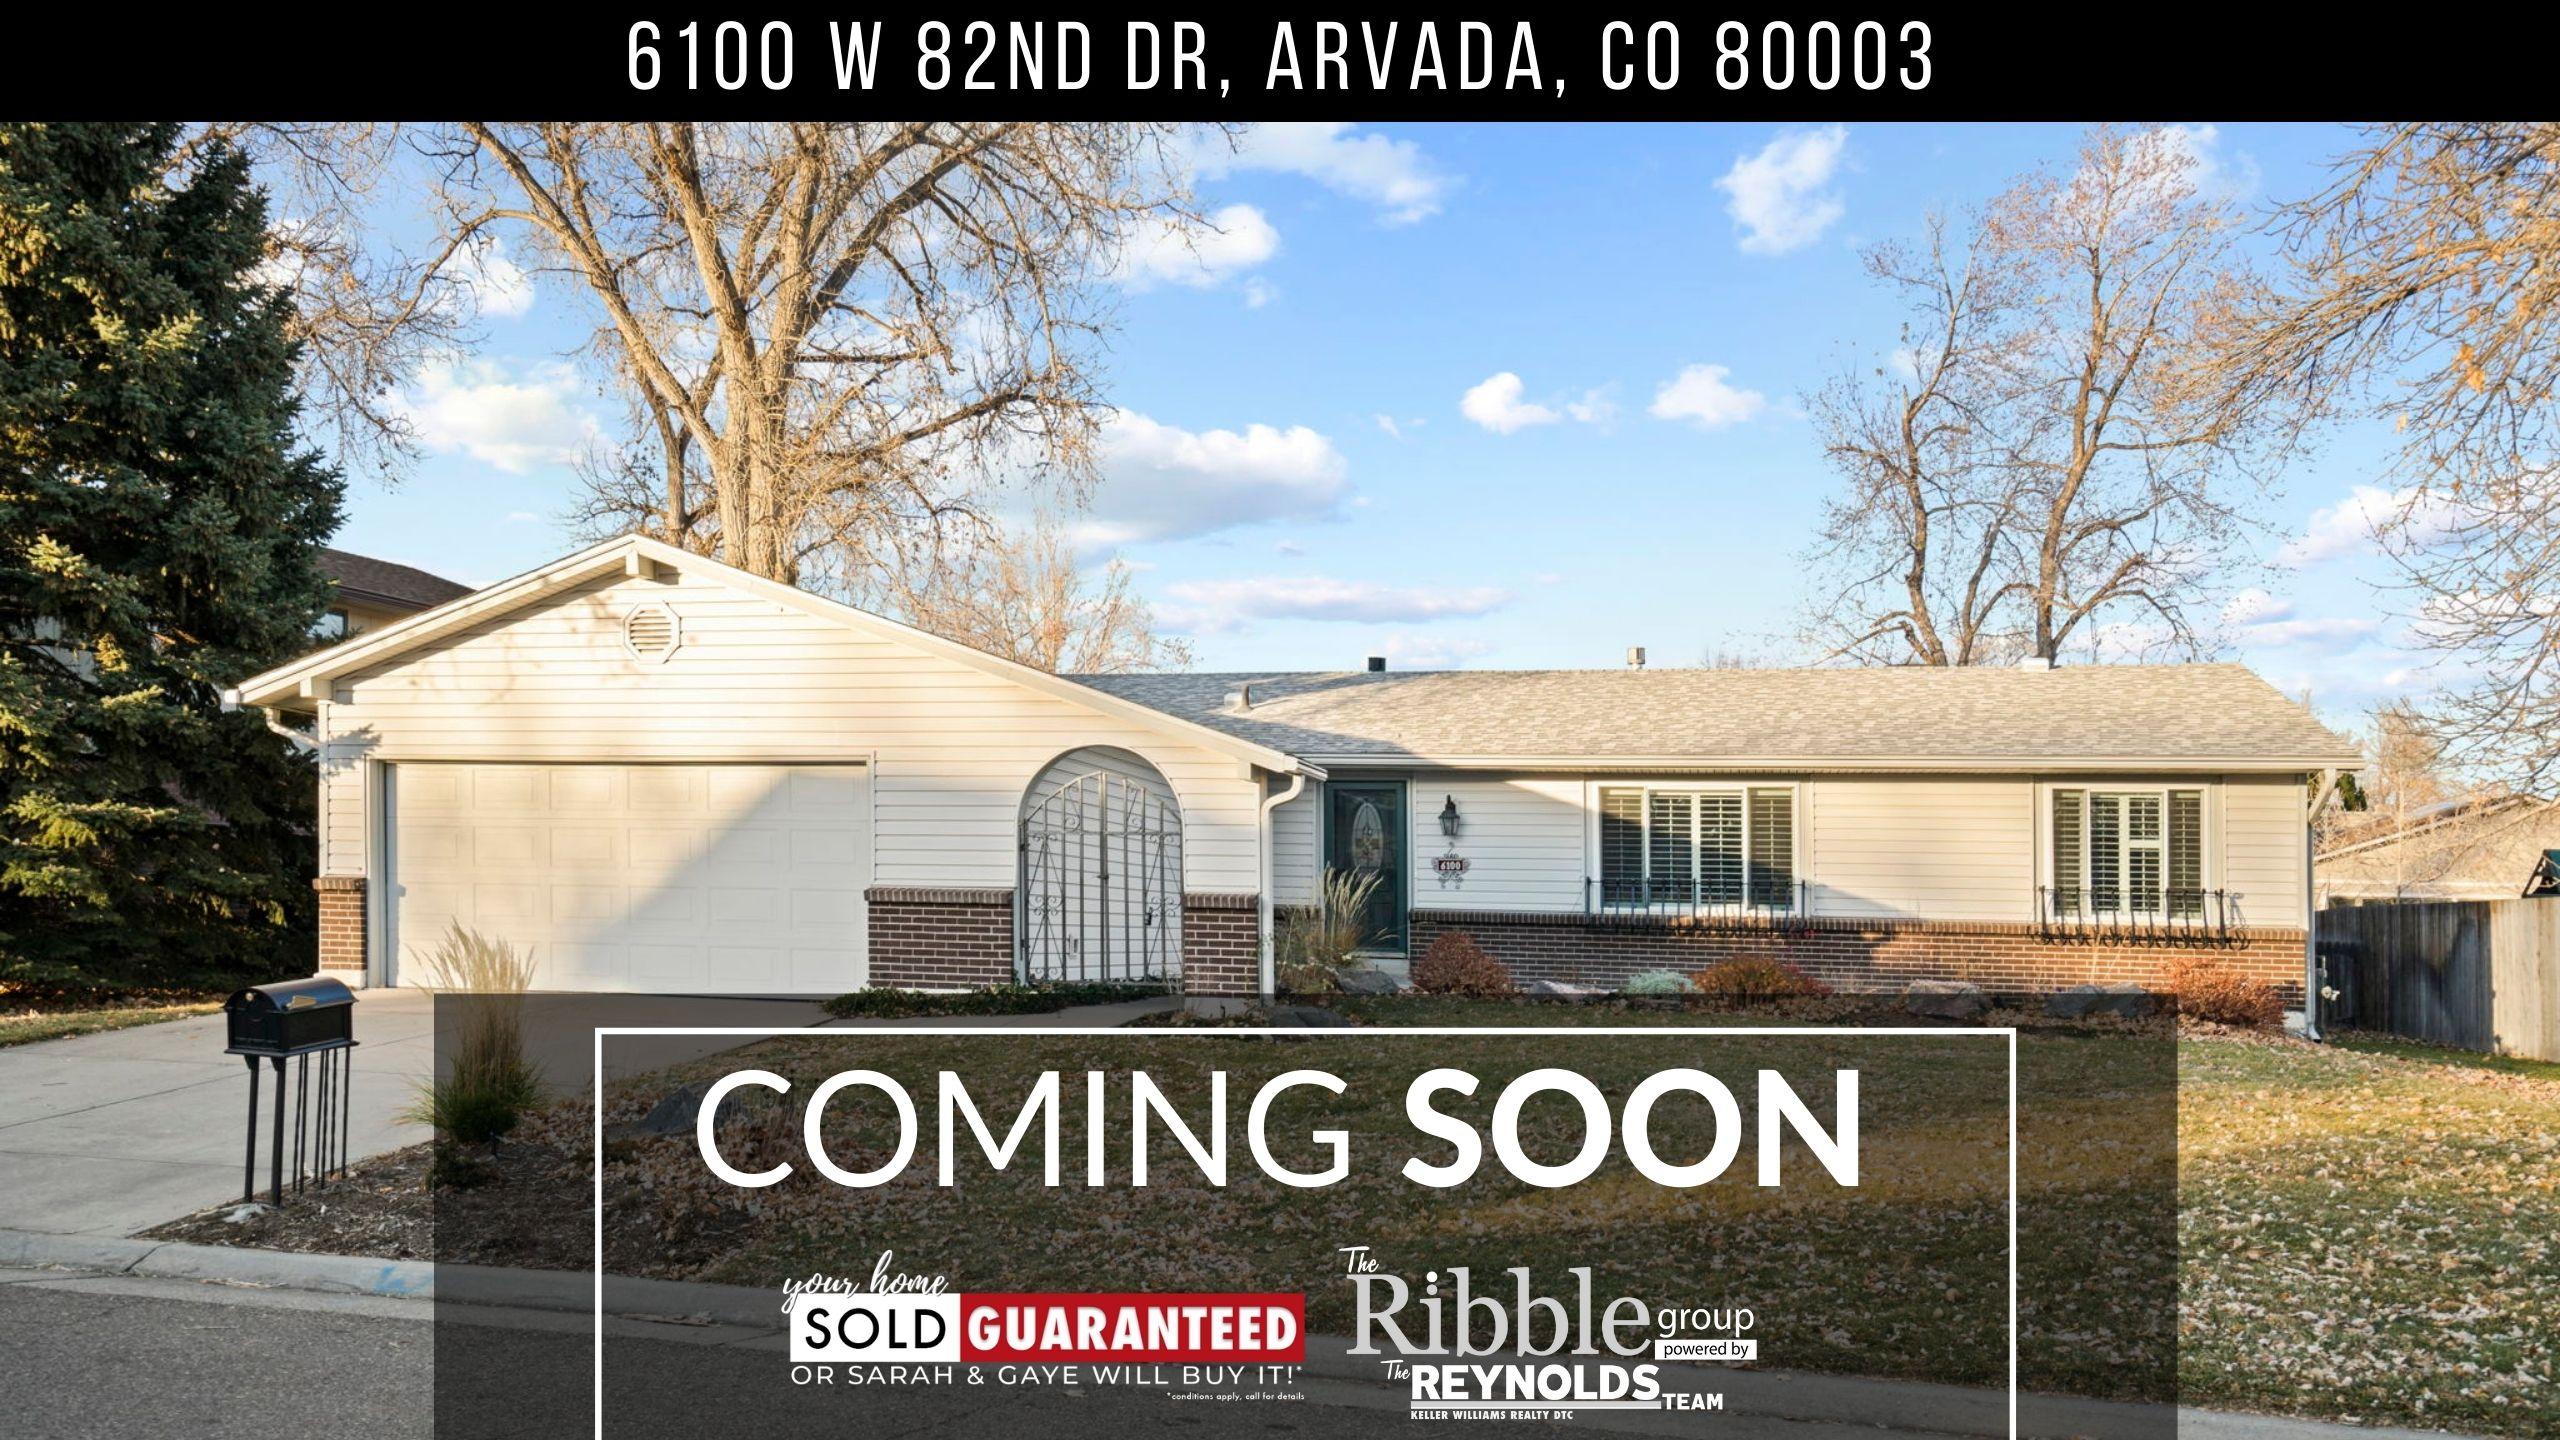 6100 W 82nd Dr, Arvada, CO 80003